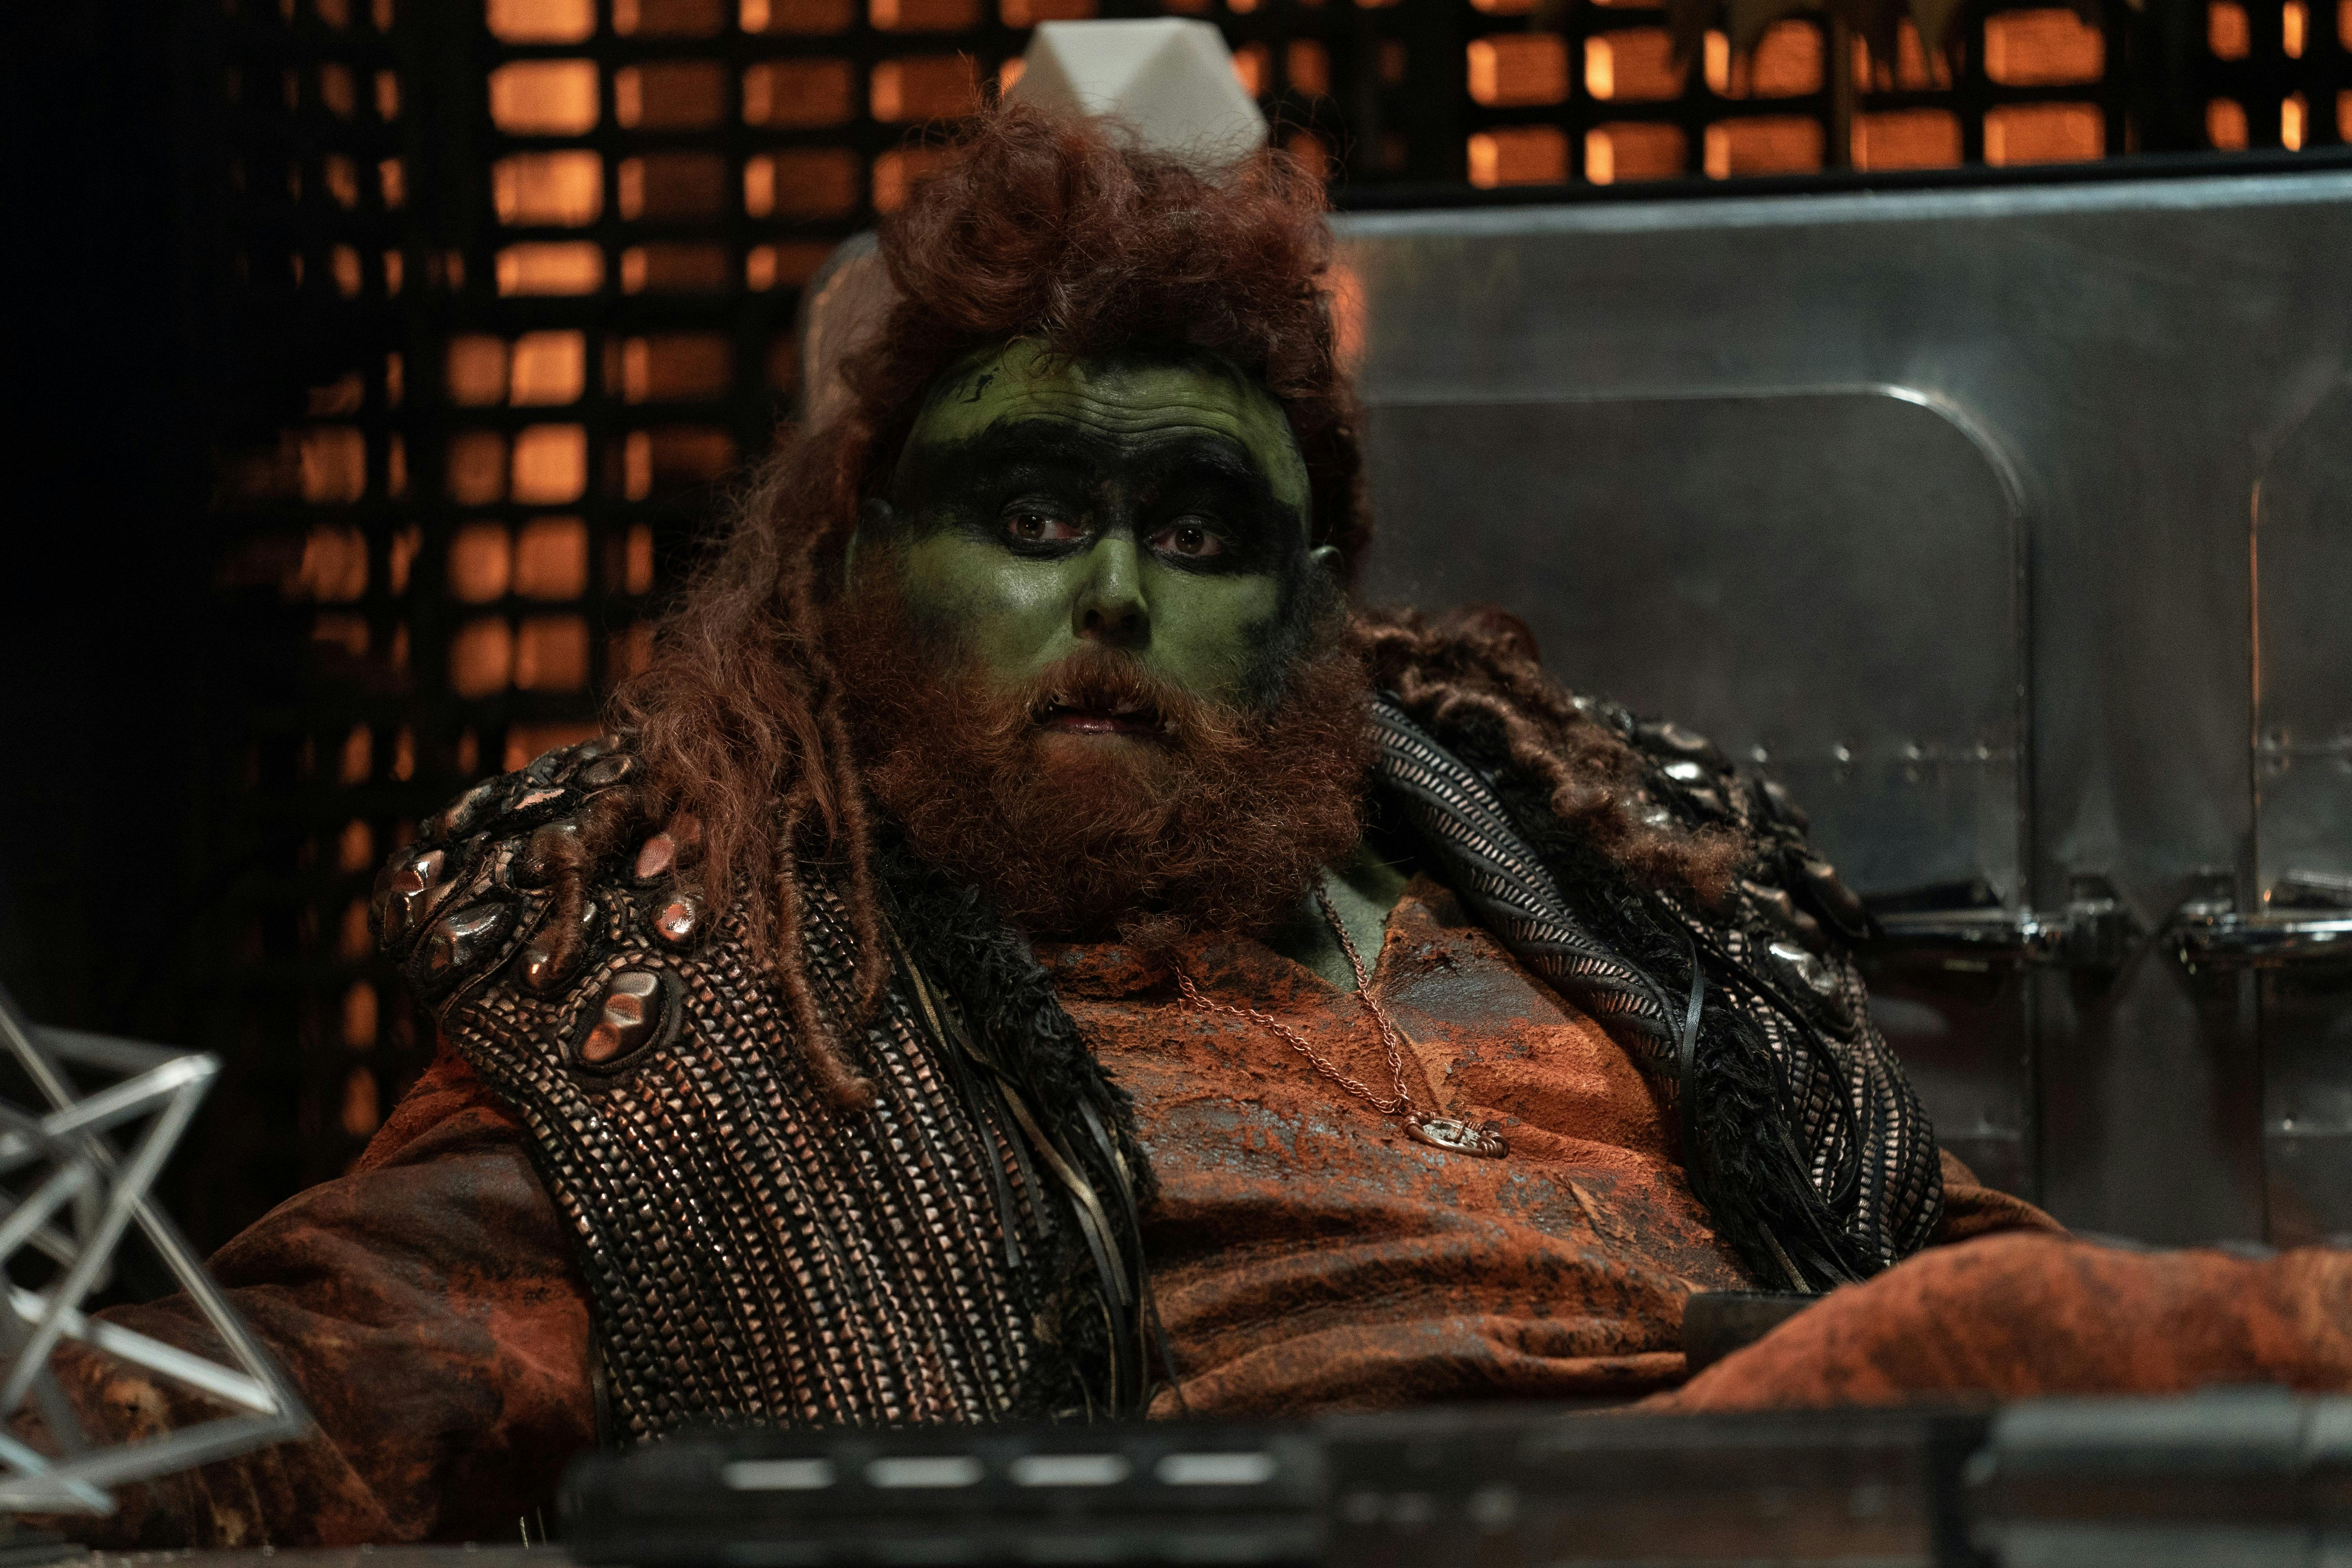 A green alien with red hair and a red beard looks quizzically at someone off camera. He is sitting behind a desk.